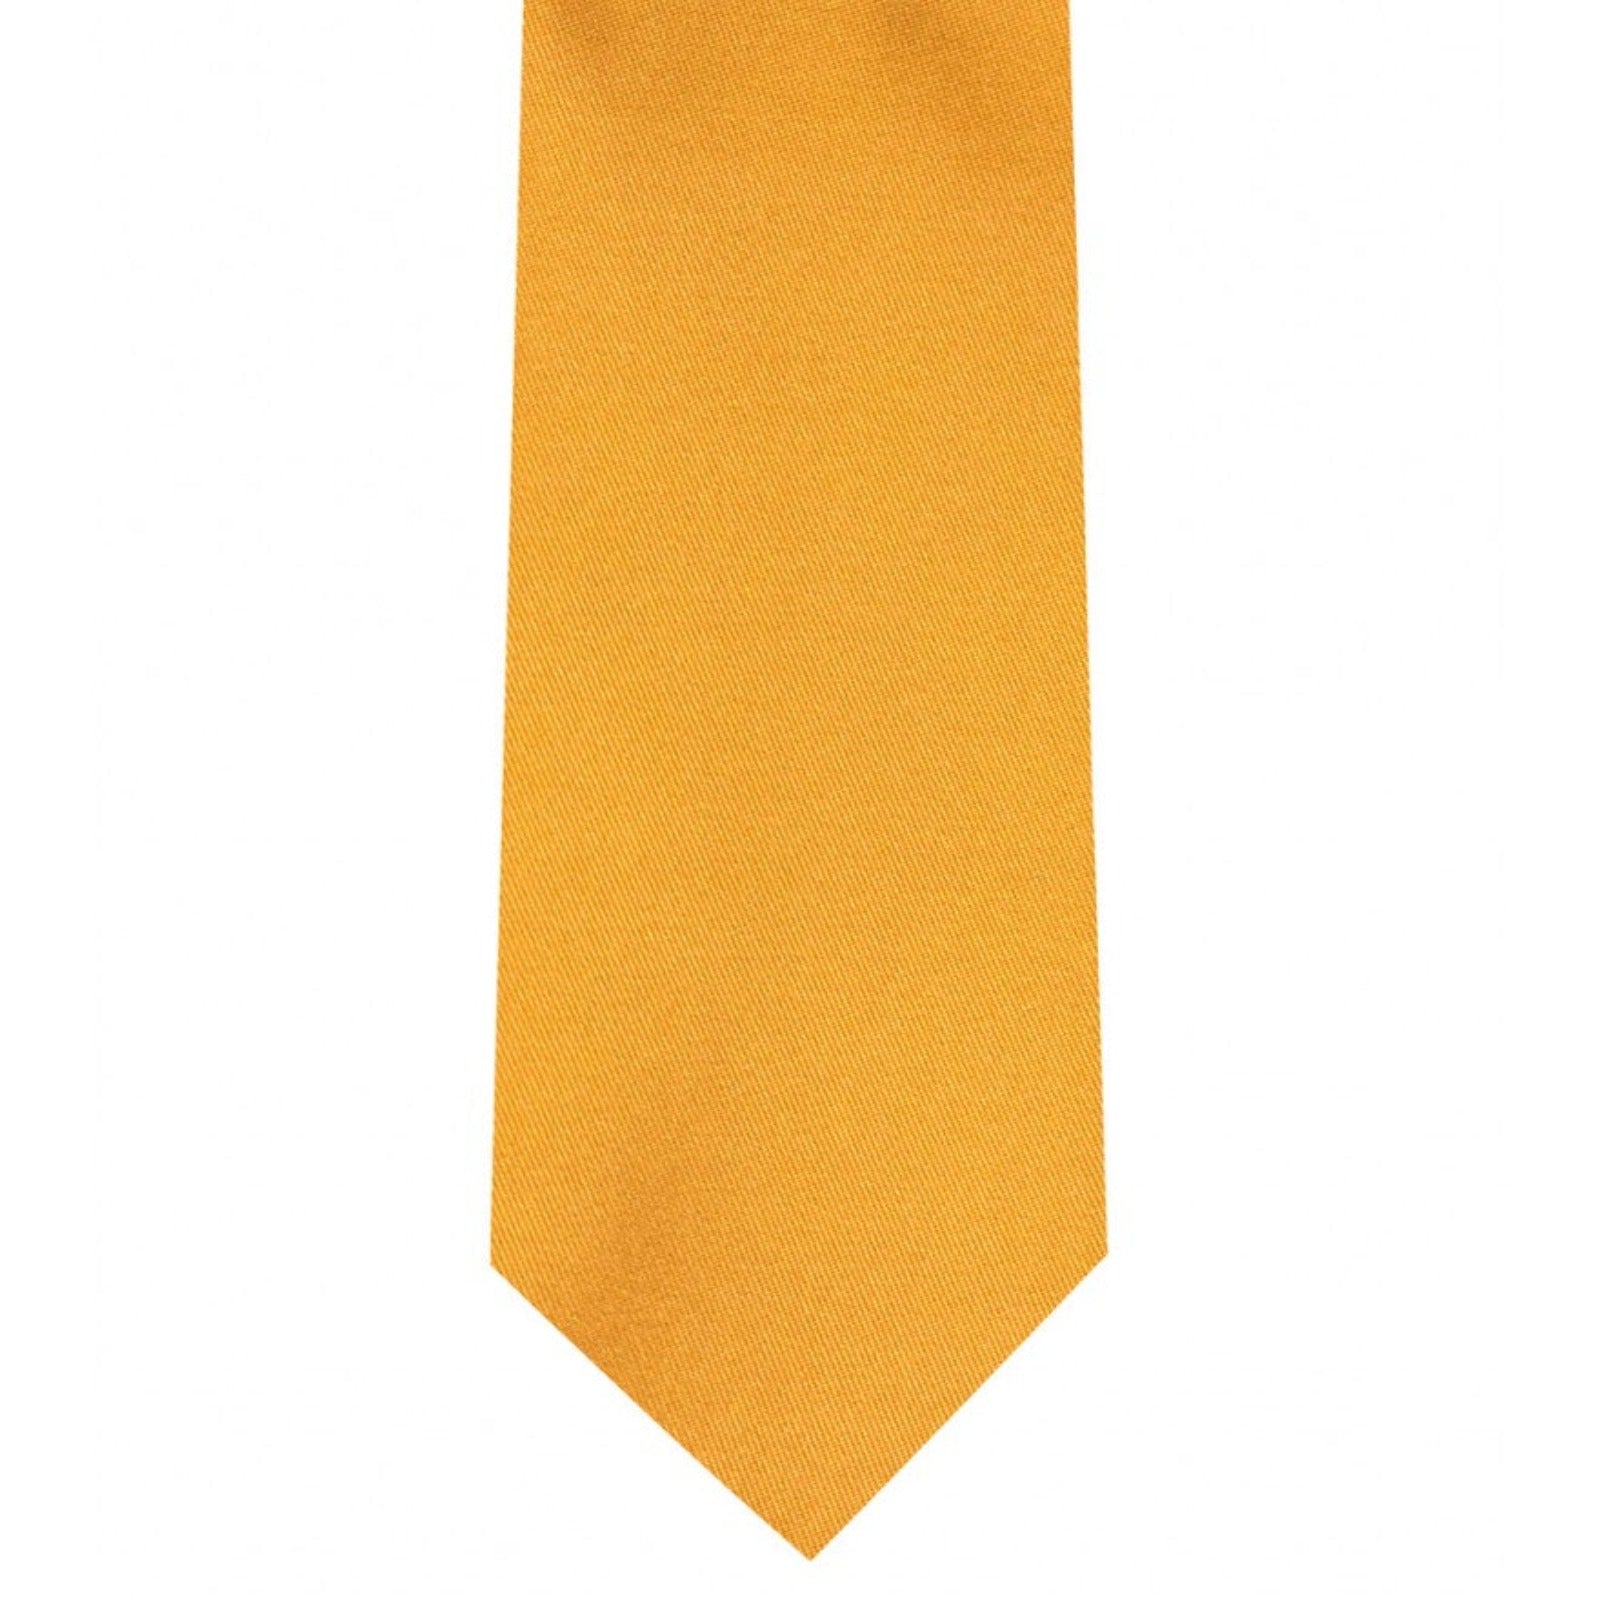 Classic Orange Tie Ultra Skinny tie width 2.25 inches With Matching Pocket Square | KCT Menswear